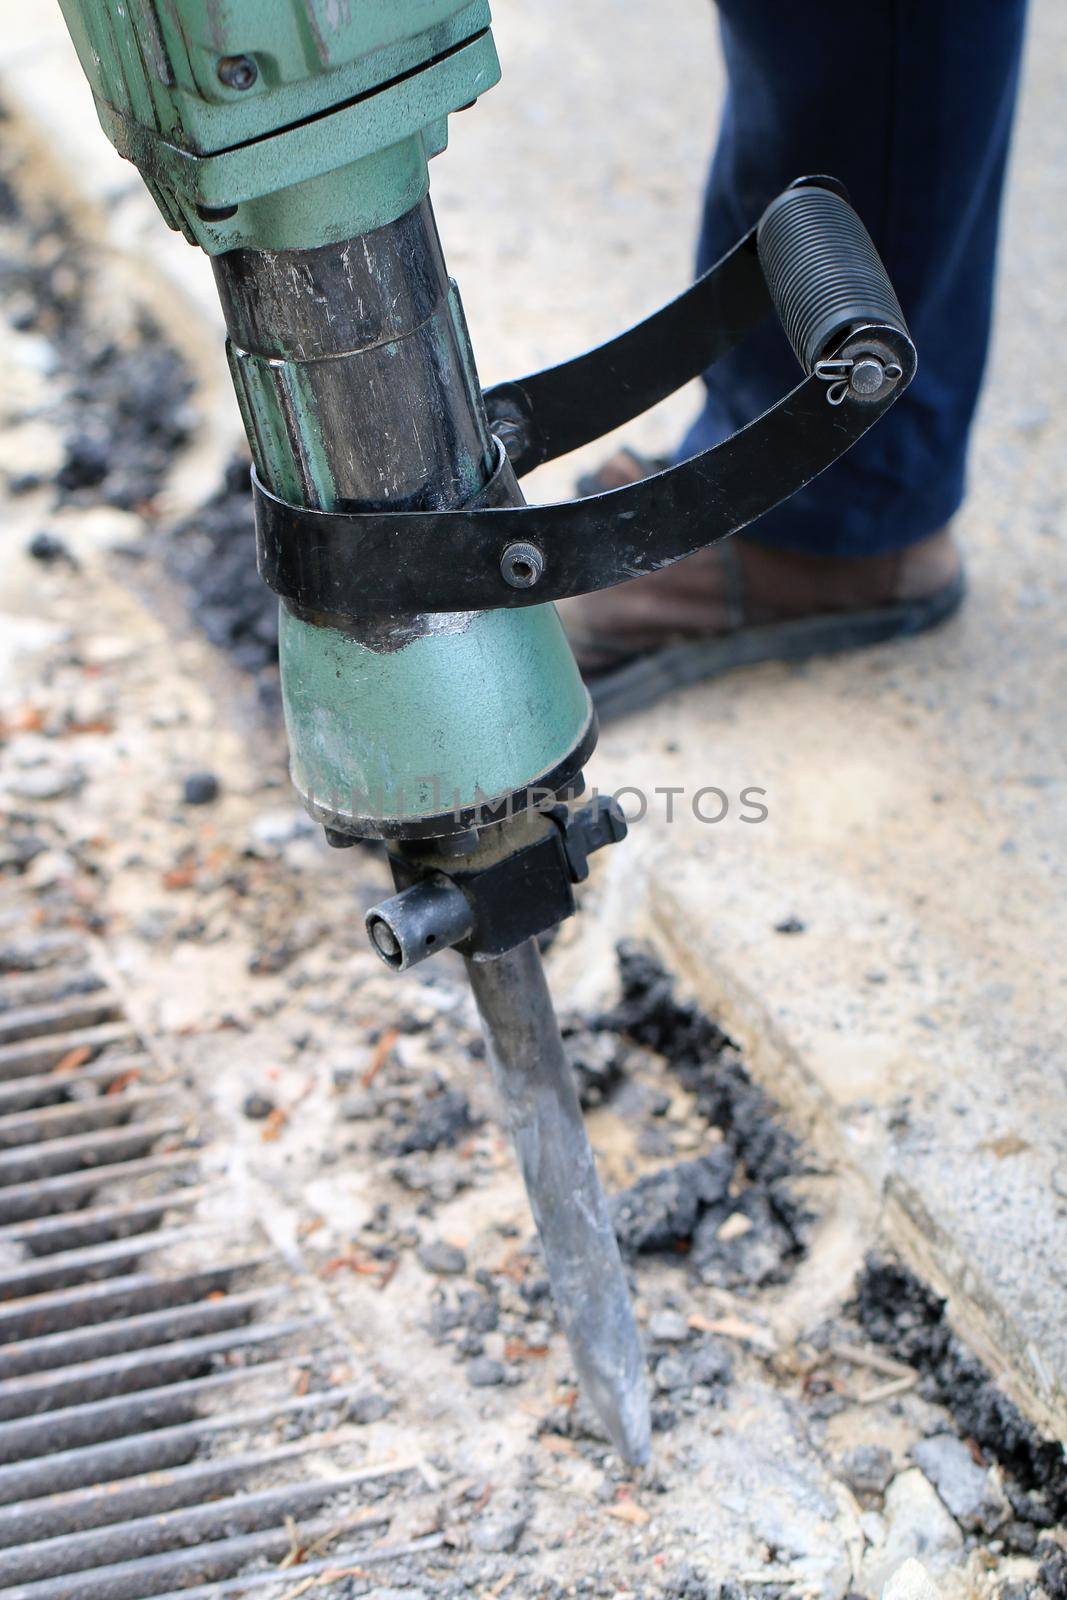 Male workers use electric concrete breaker for digging and drilling concrete repairing driveway surface with jackhammer at the local city road, during sidewalk, work construction site. by NarinNonthamand